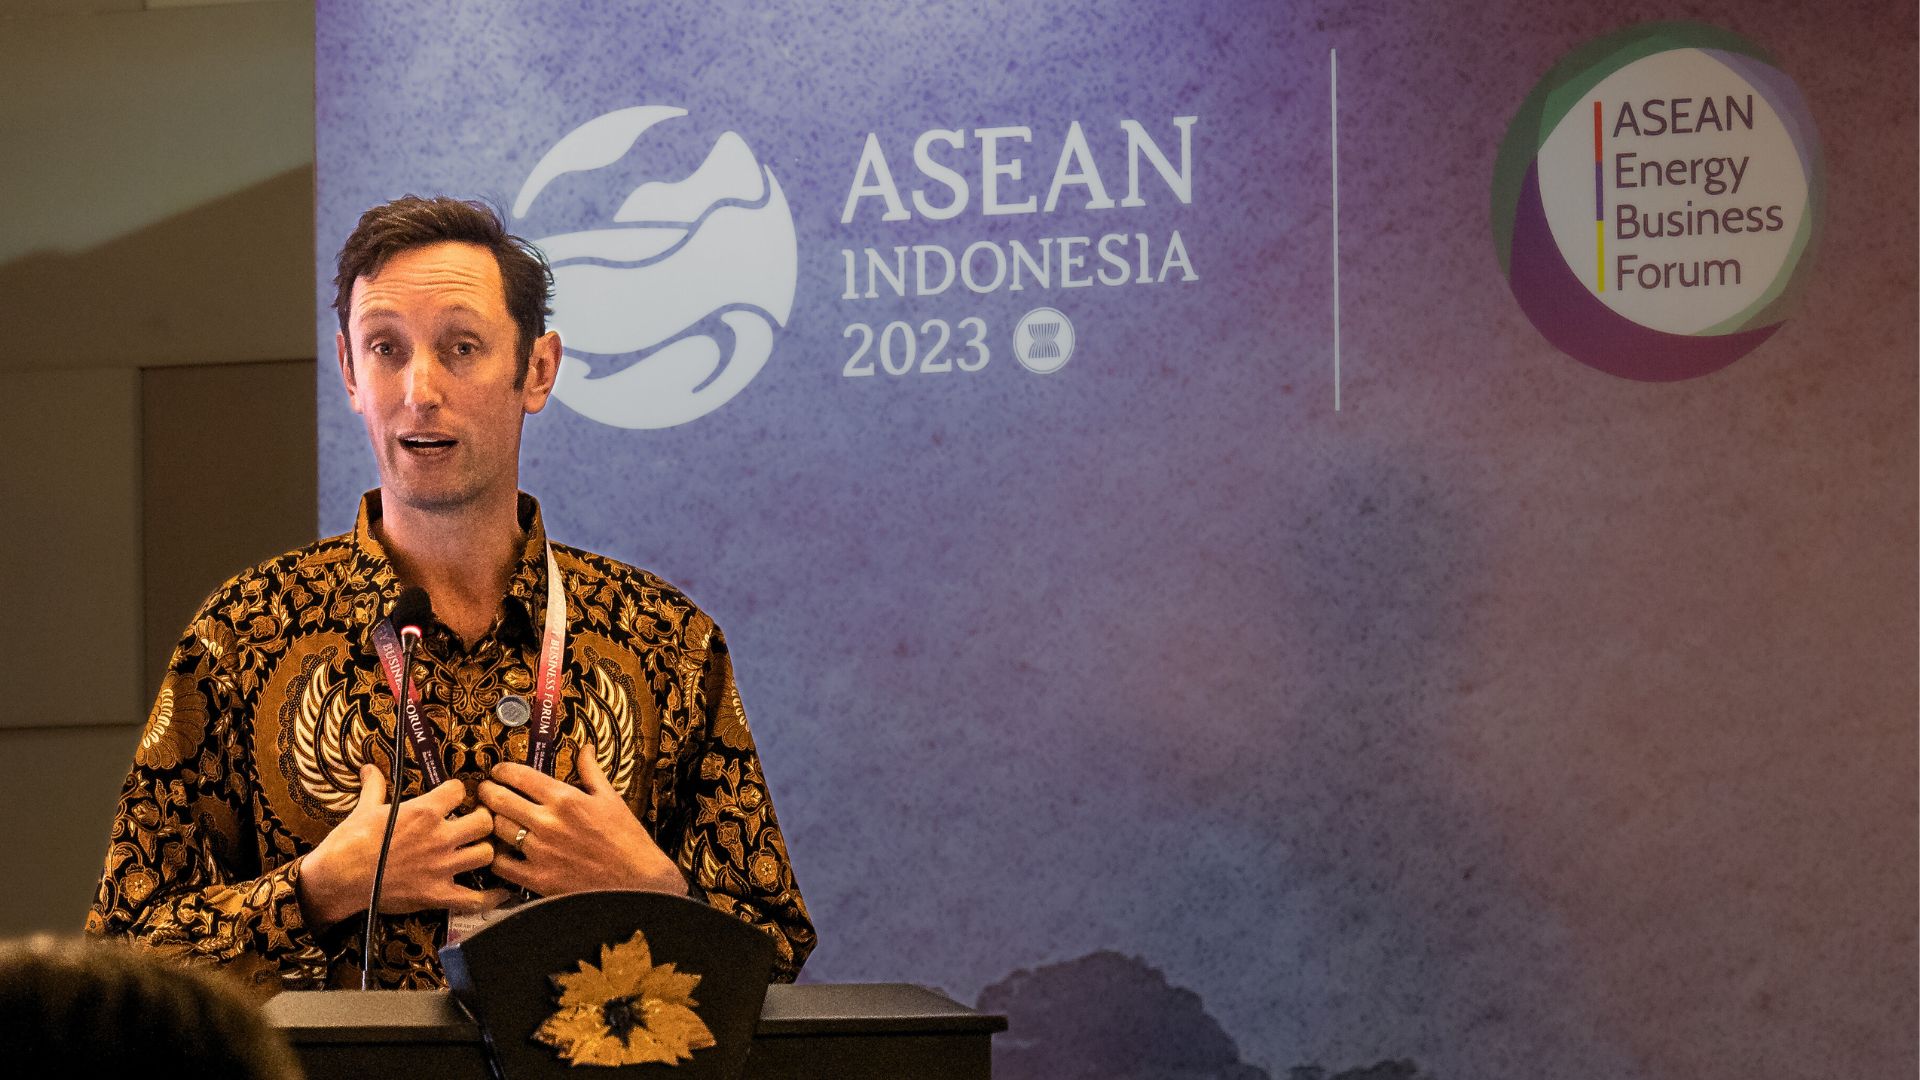 Andrew Hudson, CEO of Centre for Policy Development, in a batik shirt stands at a podium giving a speech. The background behind him reads ASEAN Indonesia 2023.